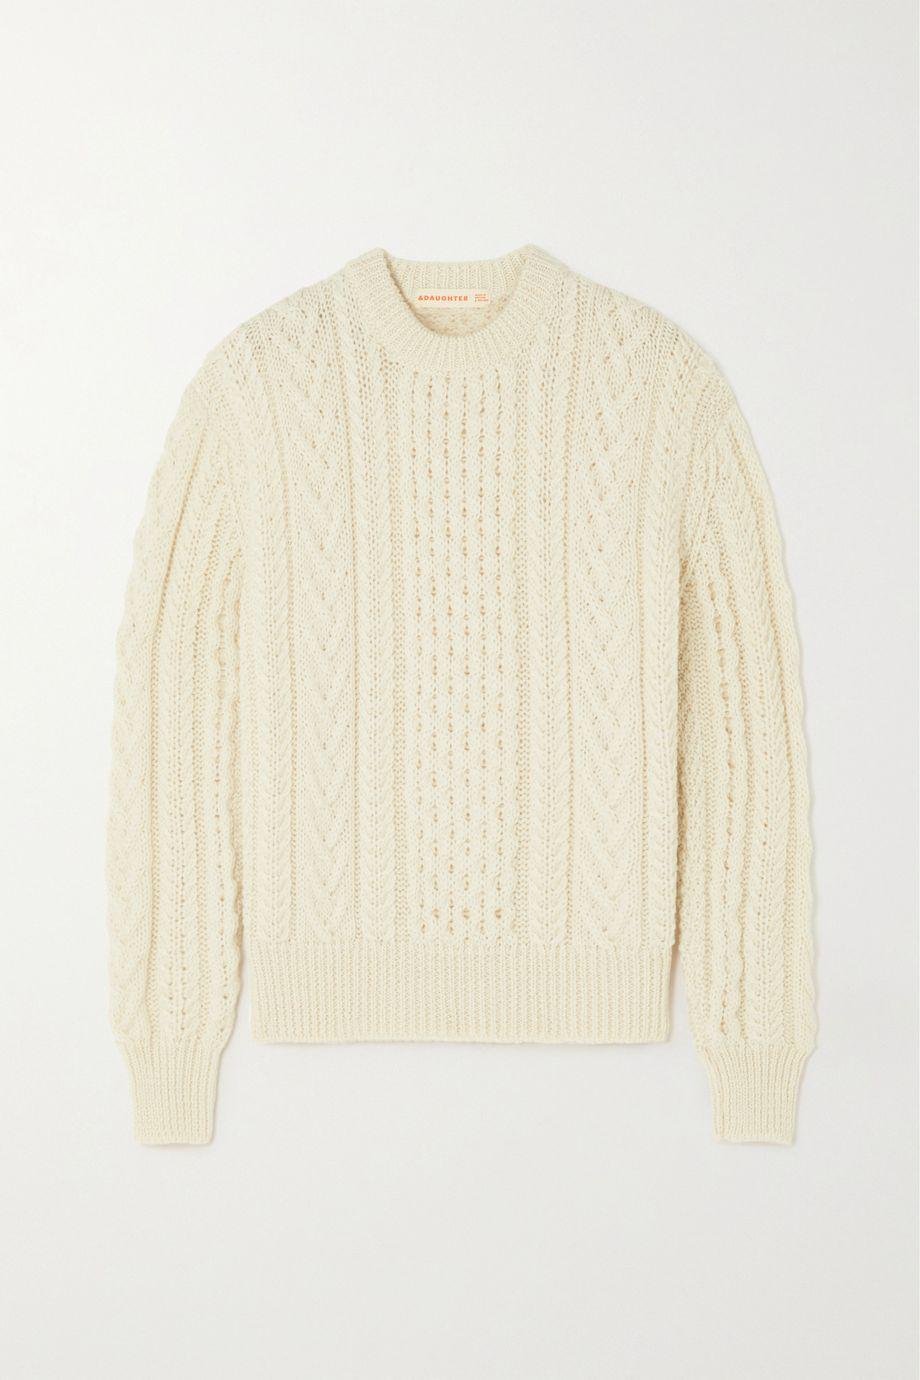 Aran cable-knit wool sweater by &DAUGHTER